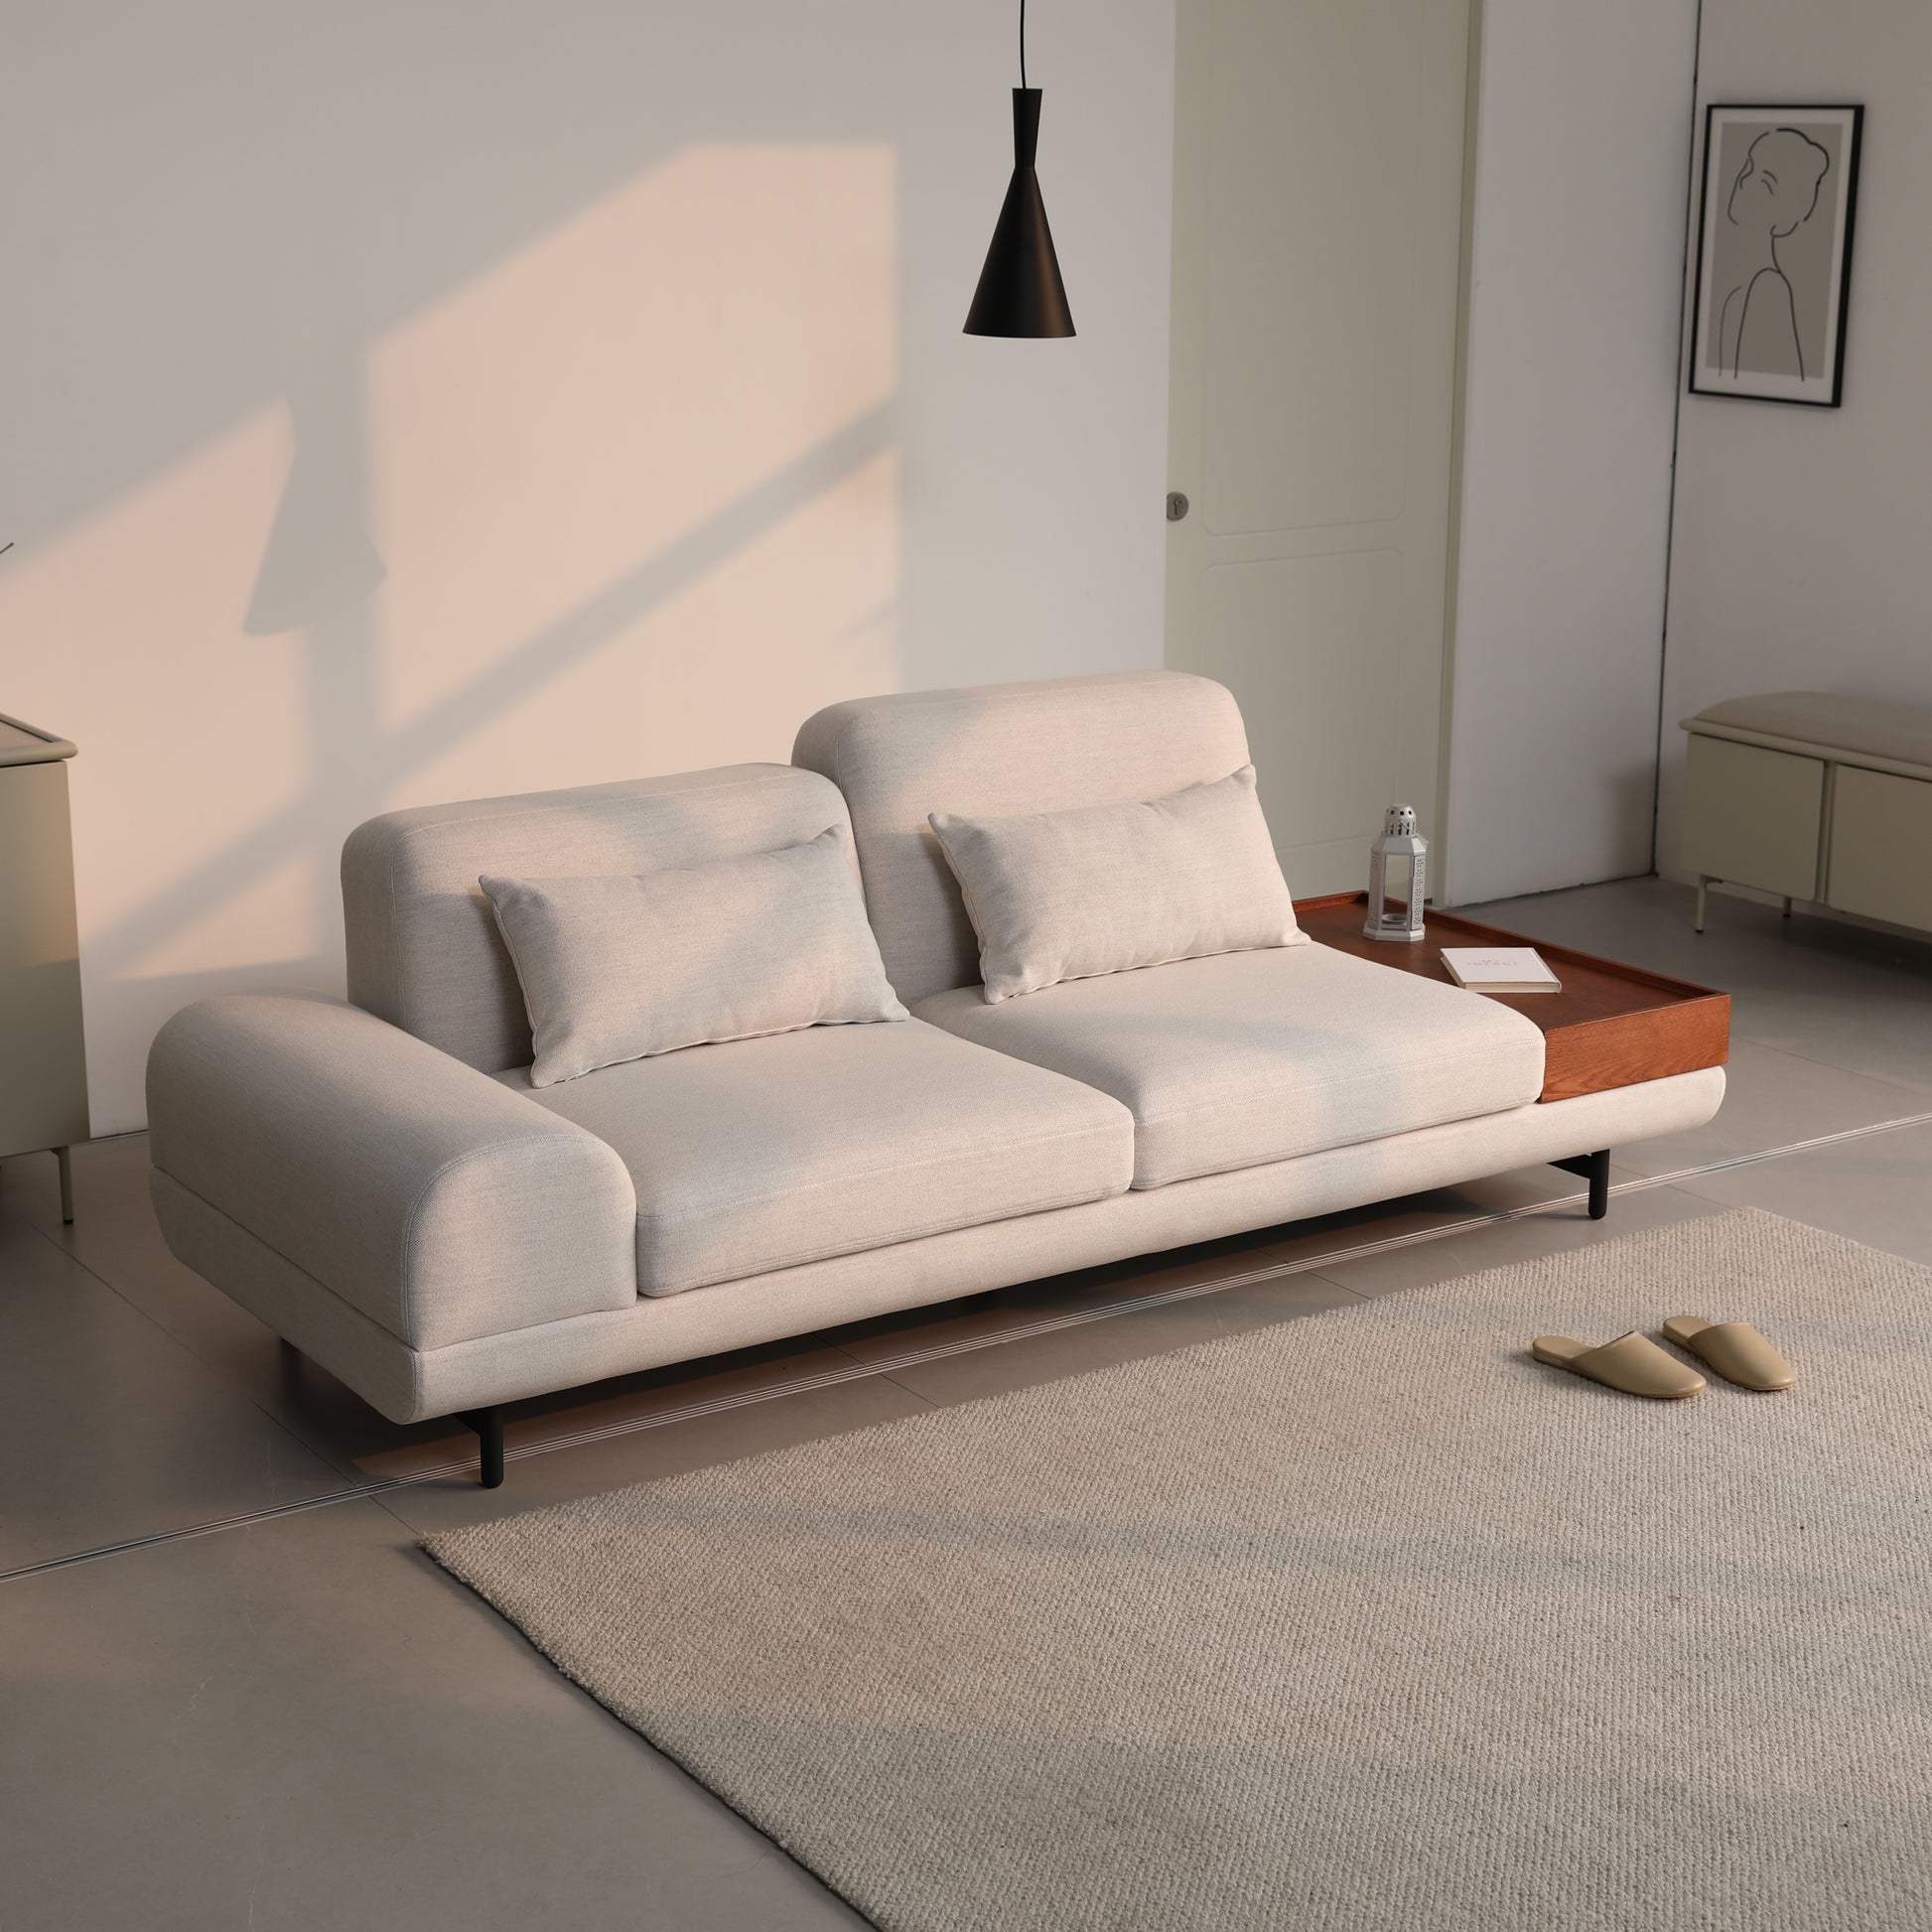 sofa-furniture-comfort-cushions-cover-pillow-consoles-coffee table